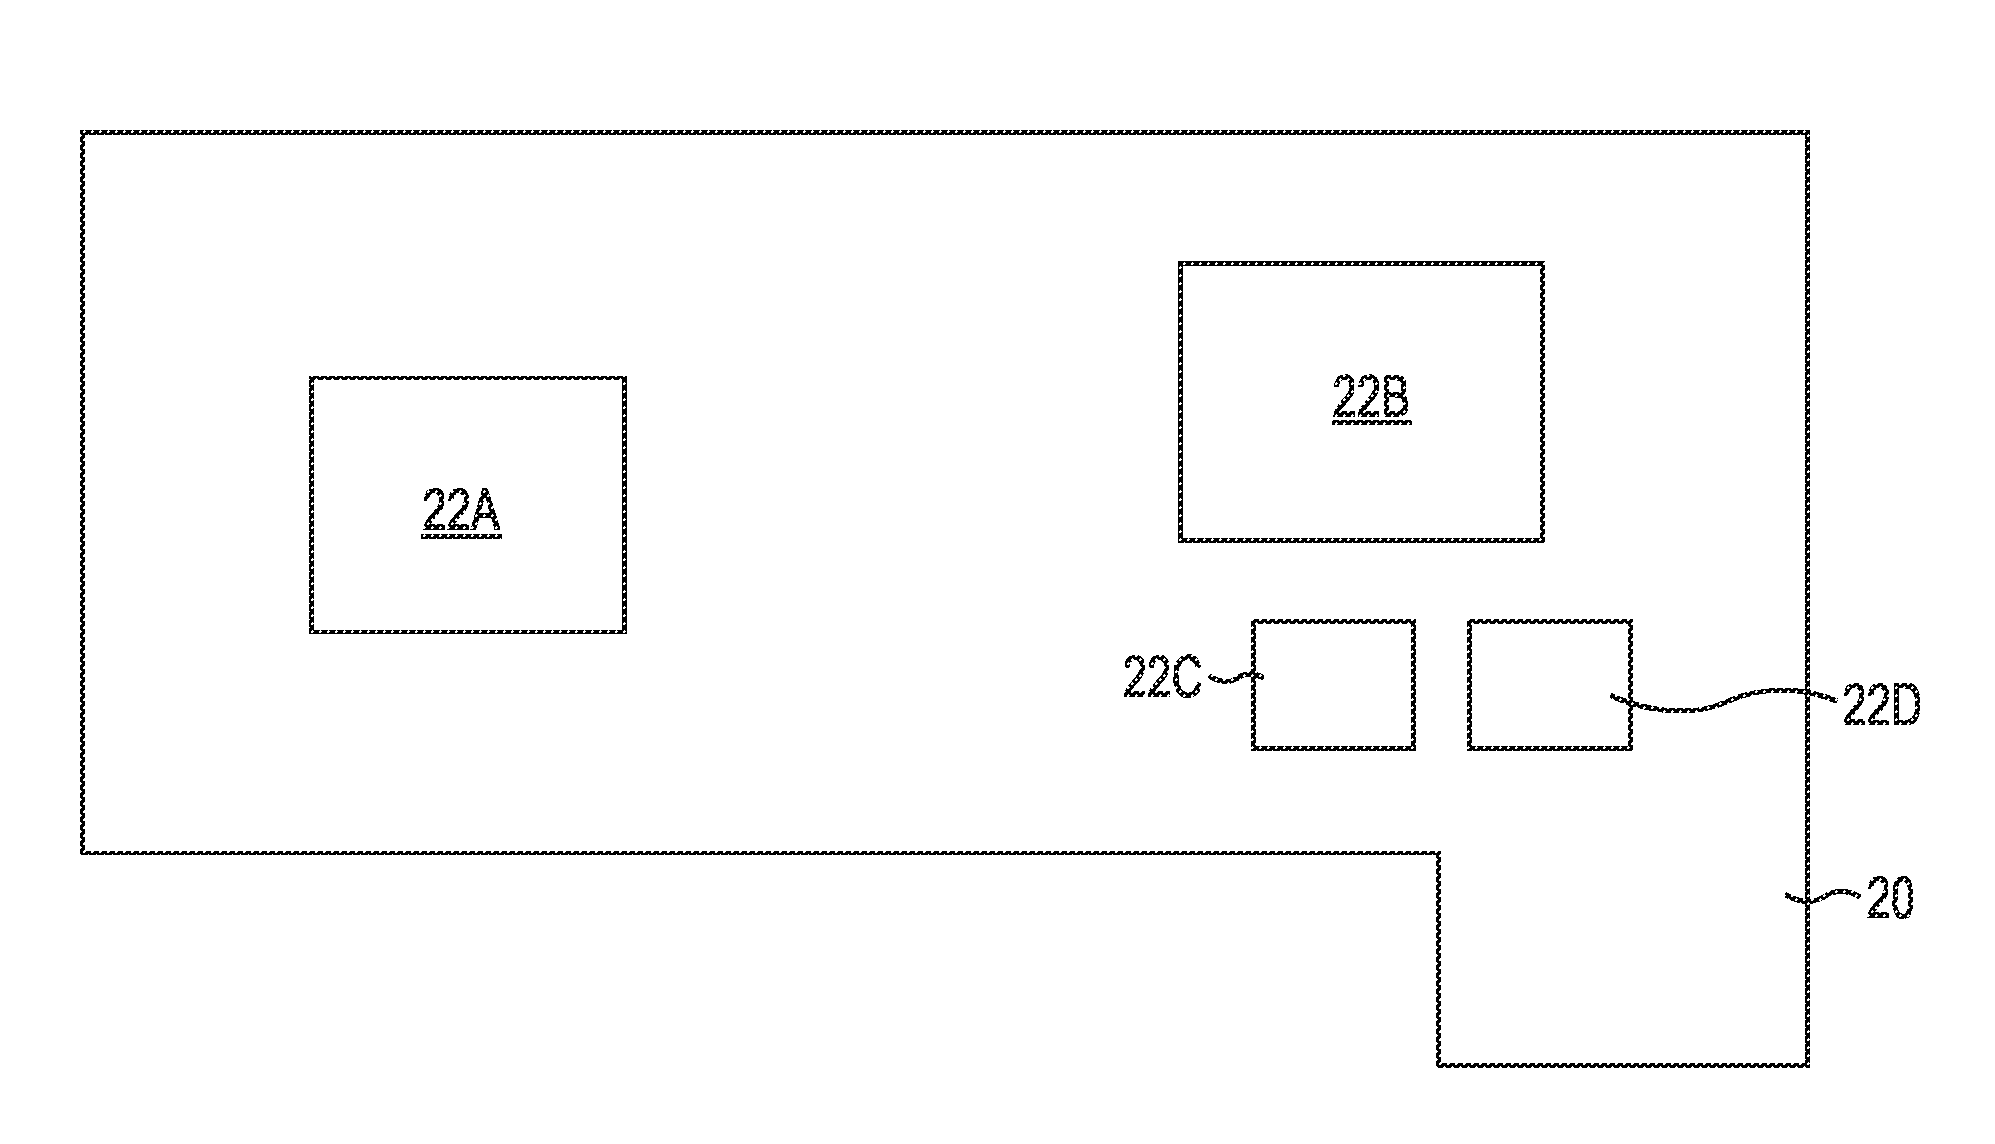 Hybrid printed circuit assembly with low density main core and embedded high density circuit regions